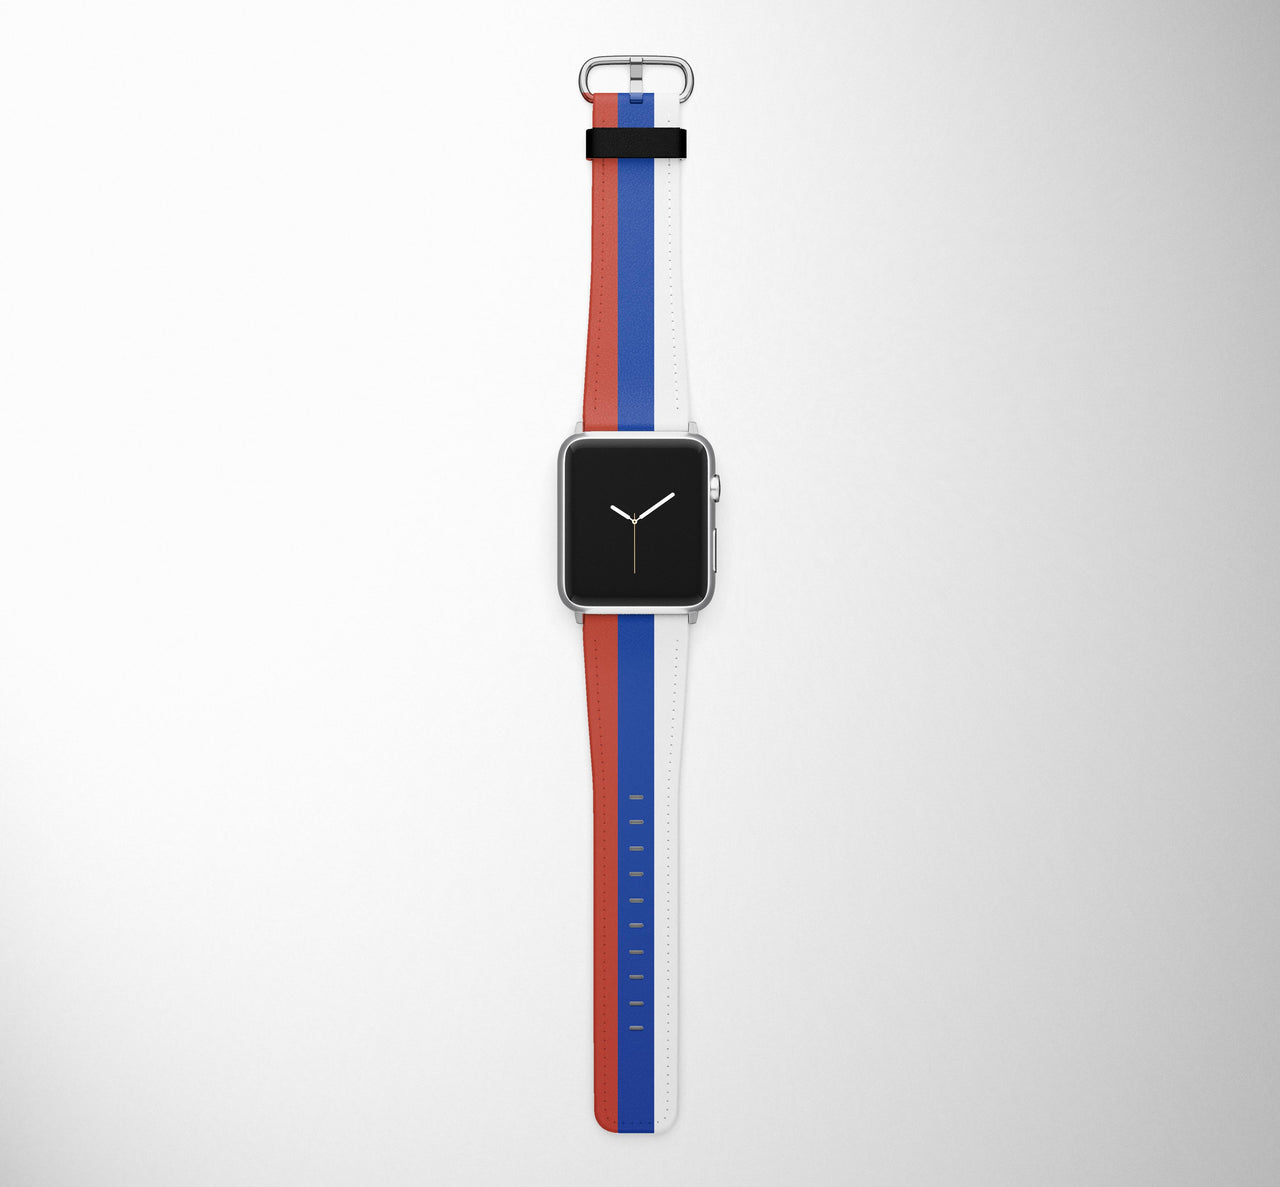 Russia Flag Designed Leather Apple Watch Straps